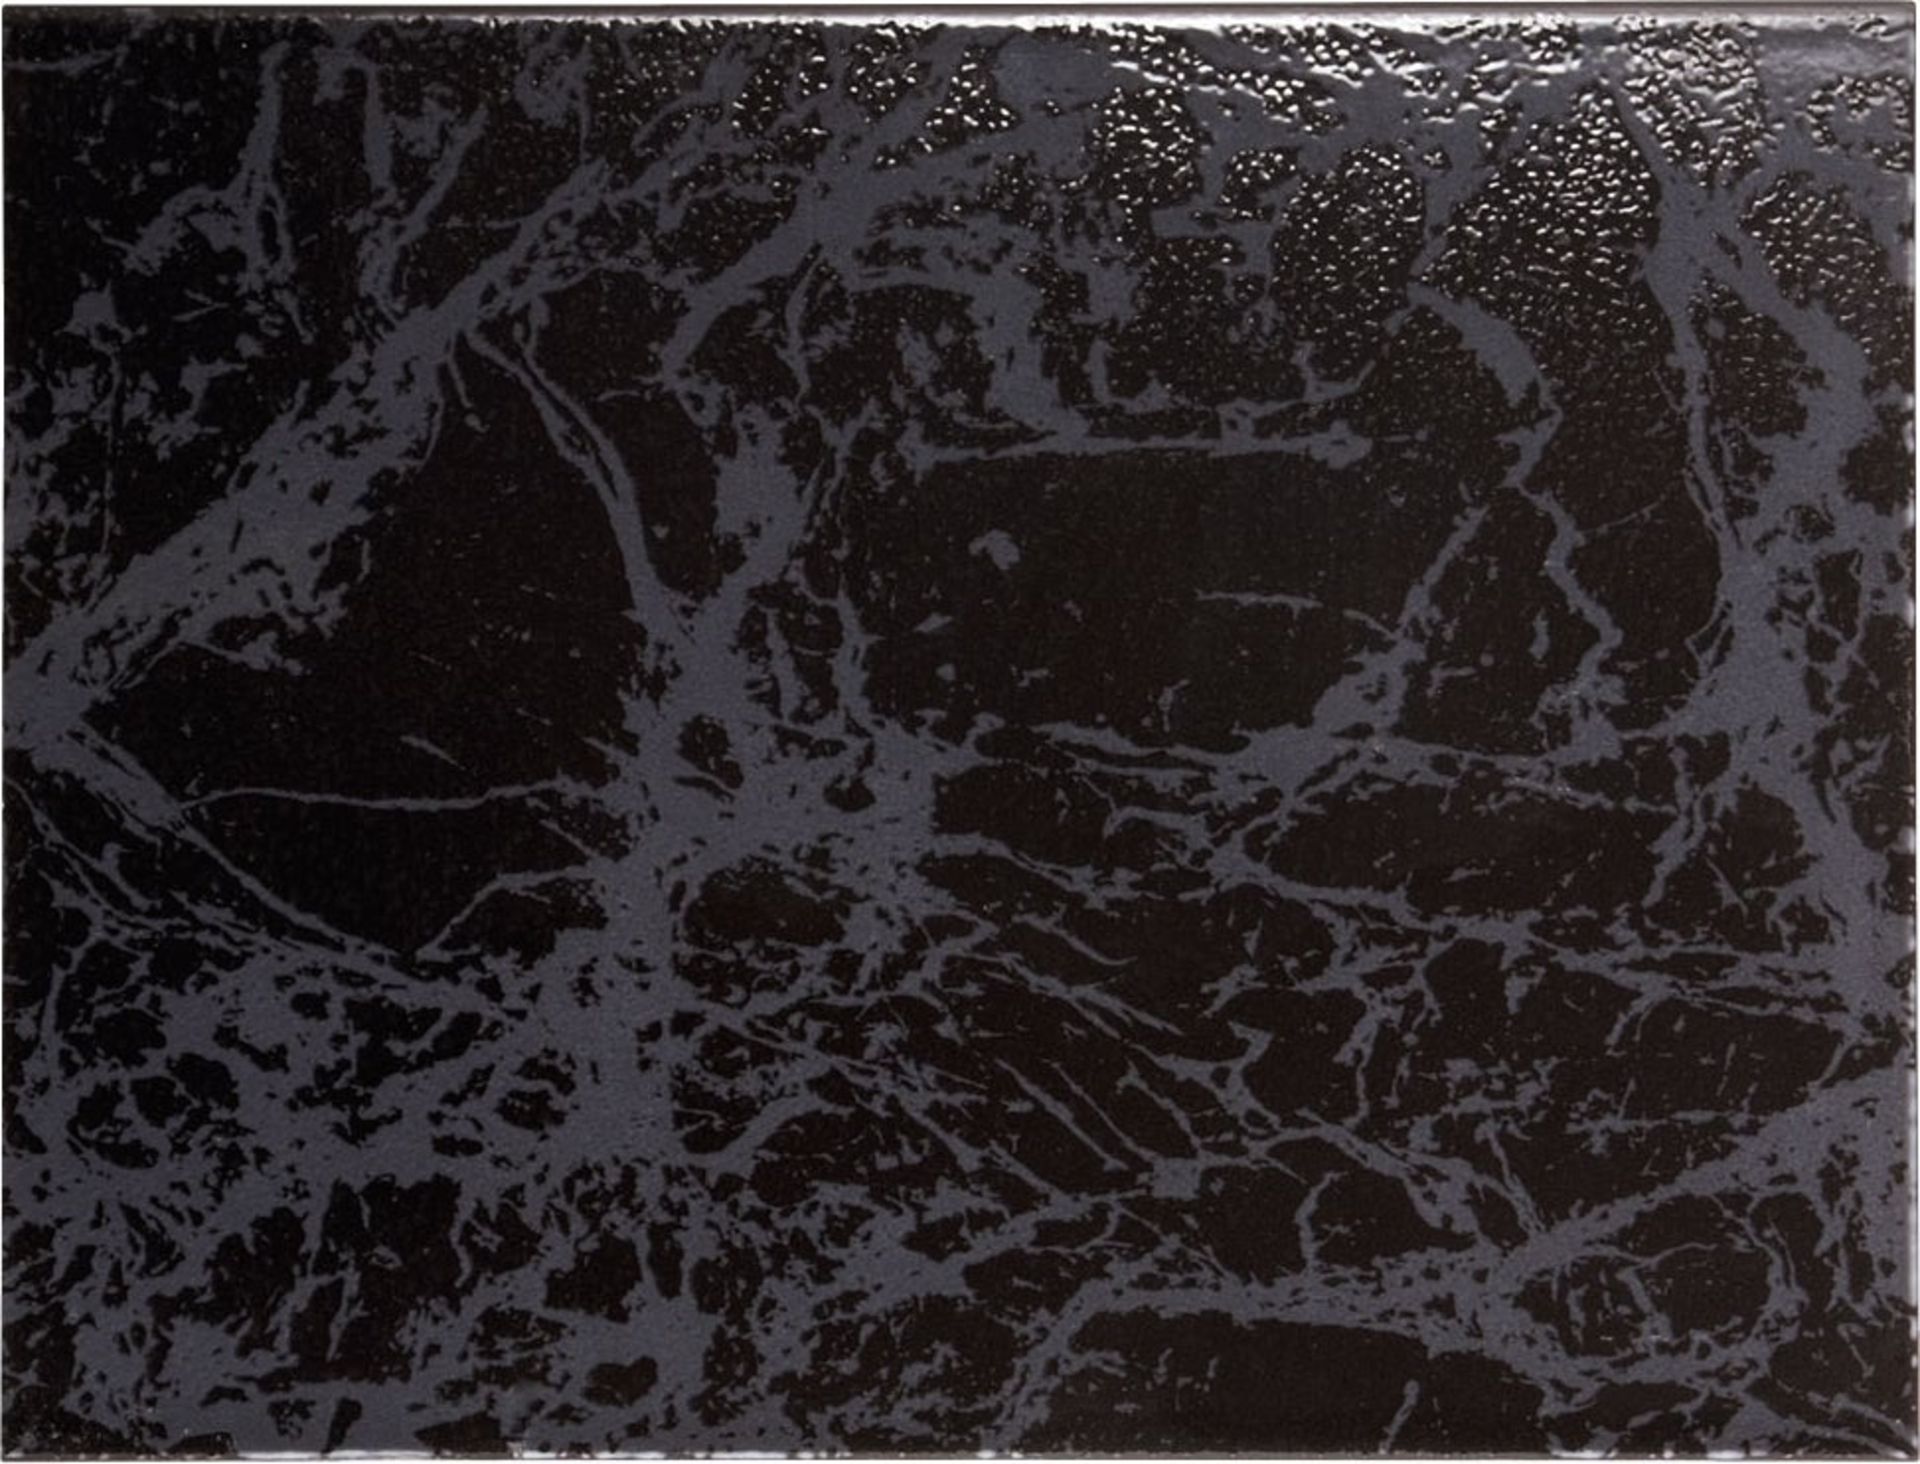 NEW 9.72m2 Ubeda Black Floor and Wall Tiles. 450x450mm per tile, 1.62m2 per pack. 8.7mm thick. The - Image 2 of 2